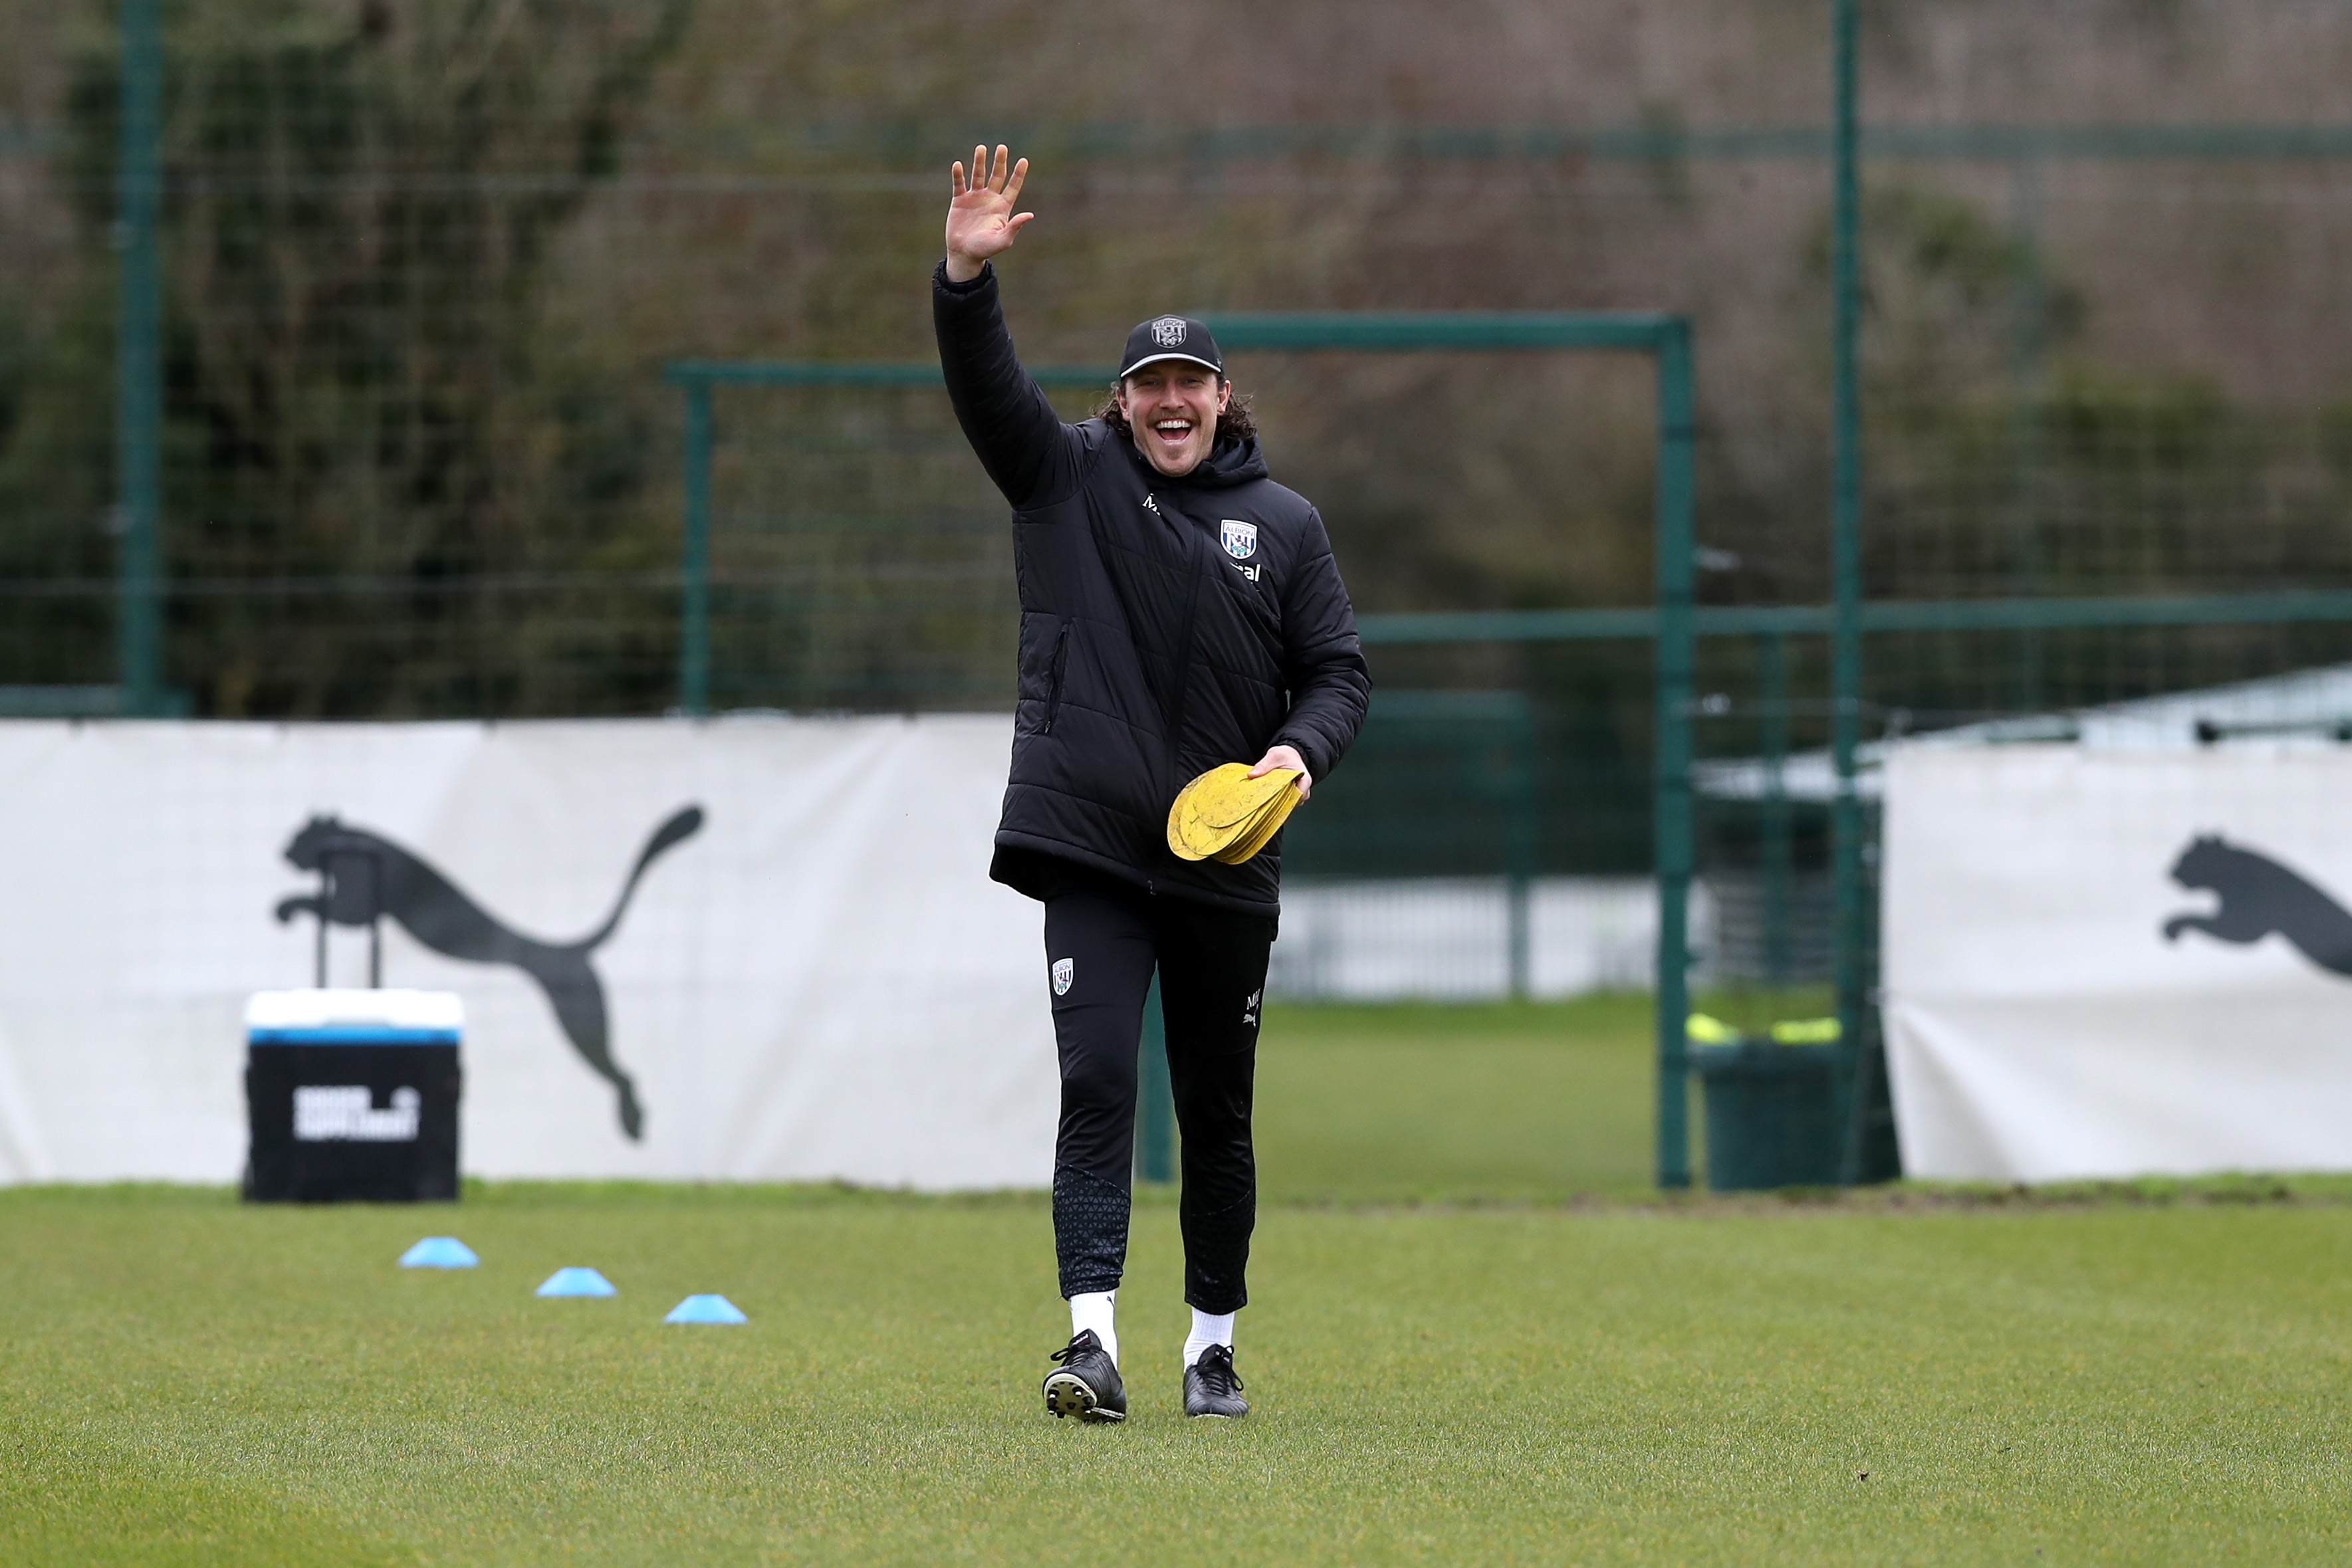 Michael Hefele waving at the camera while out on the training pitch